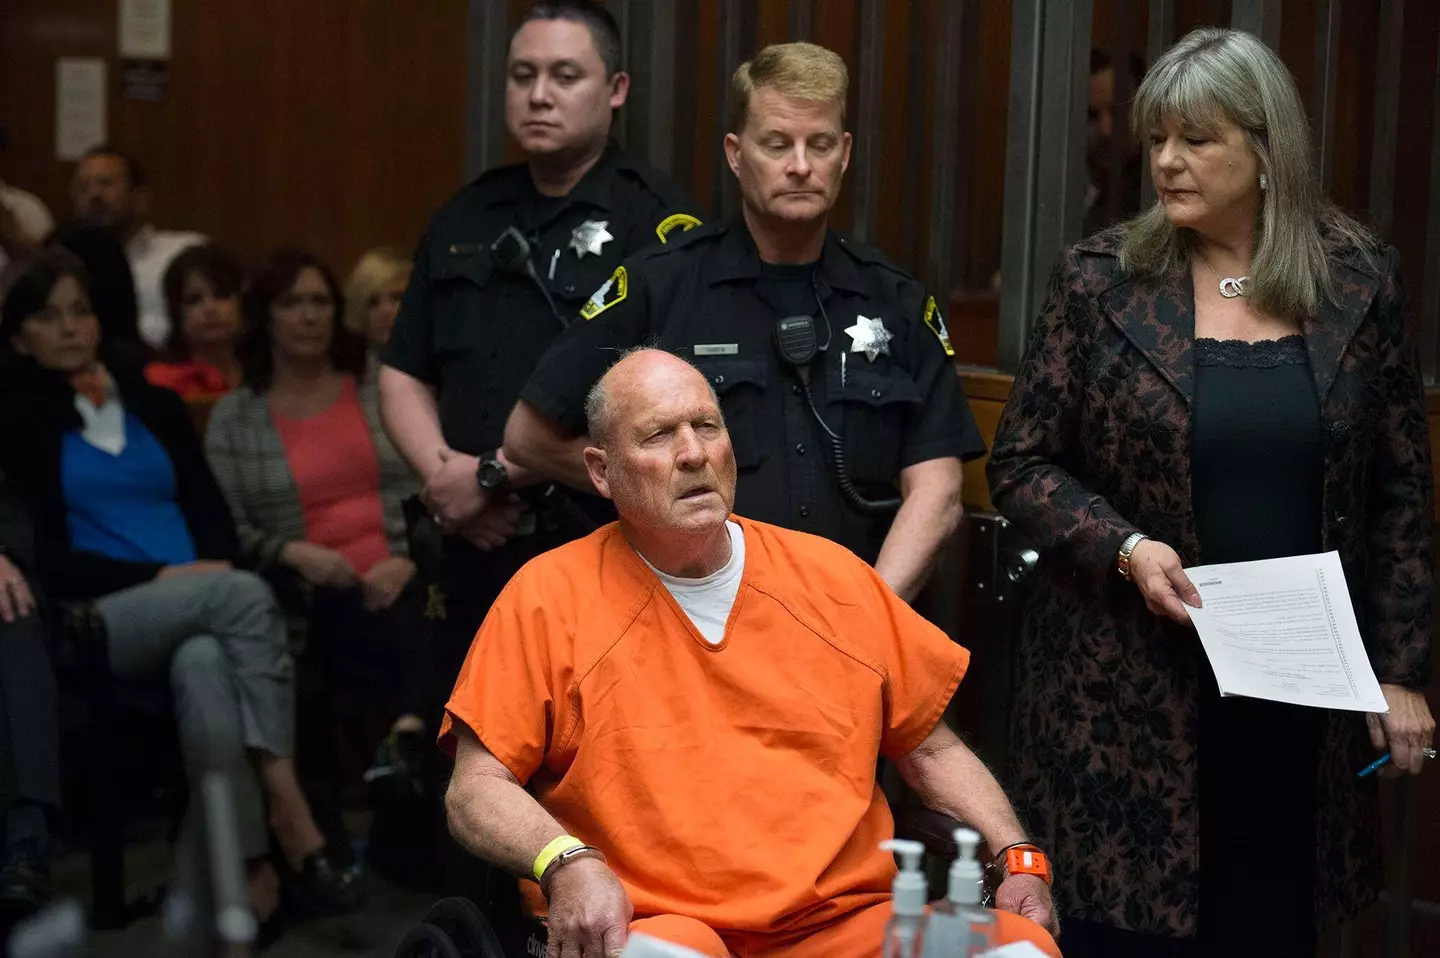 The 'Golden State Killer' killed at least 13 people over the course of 12 years.